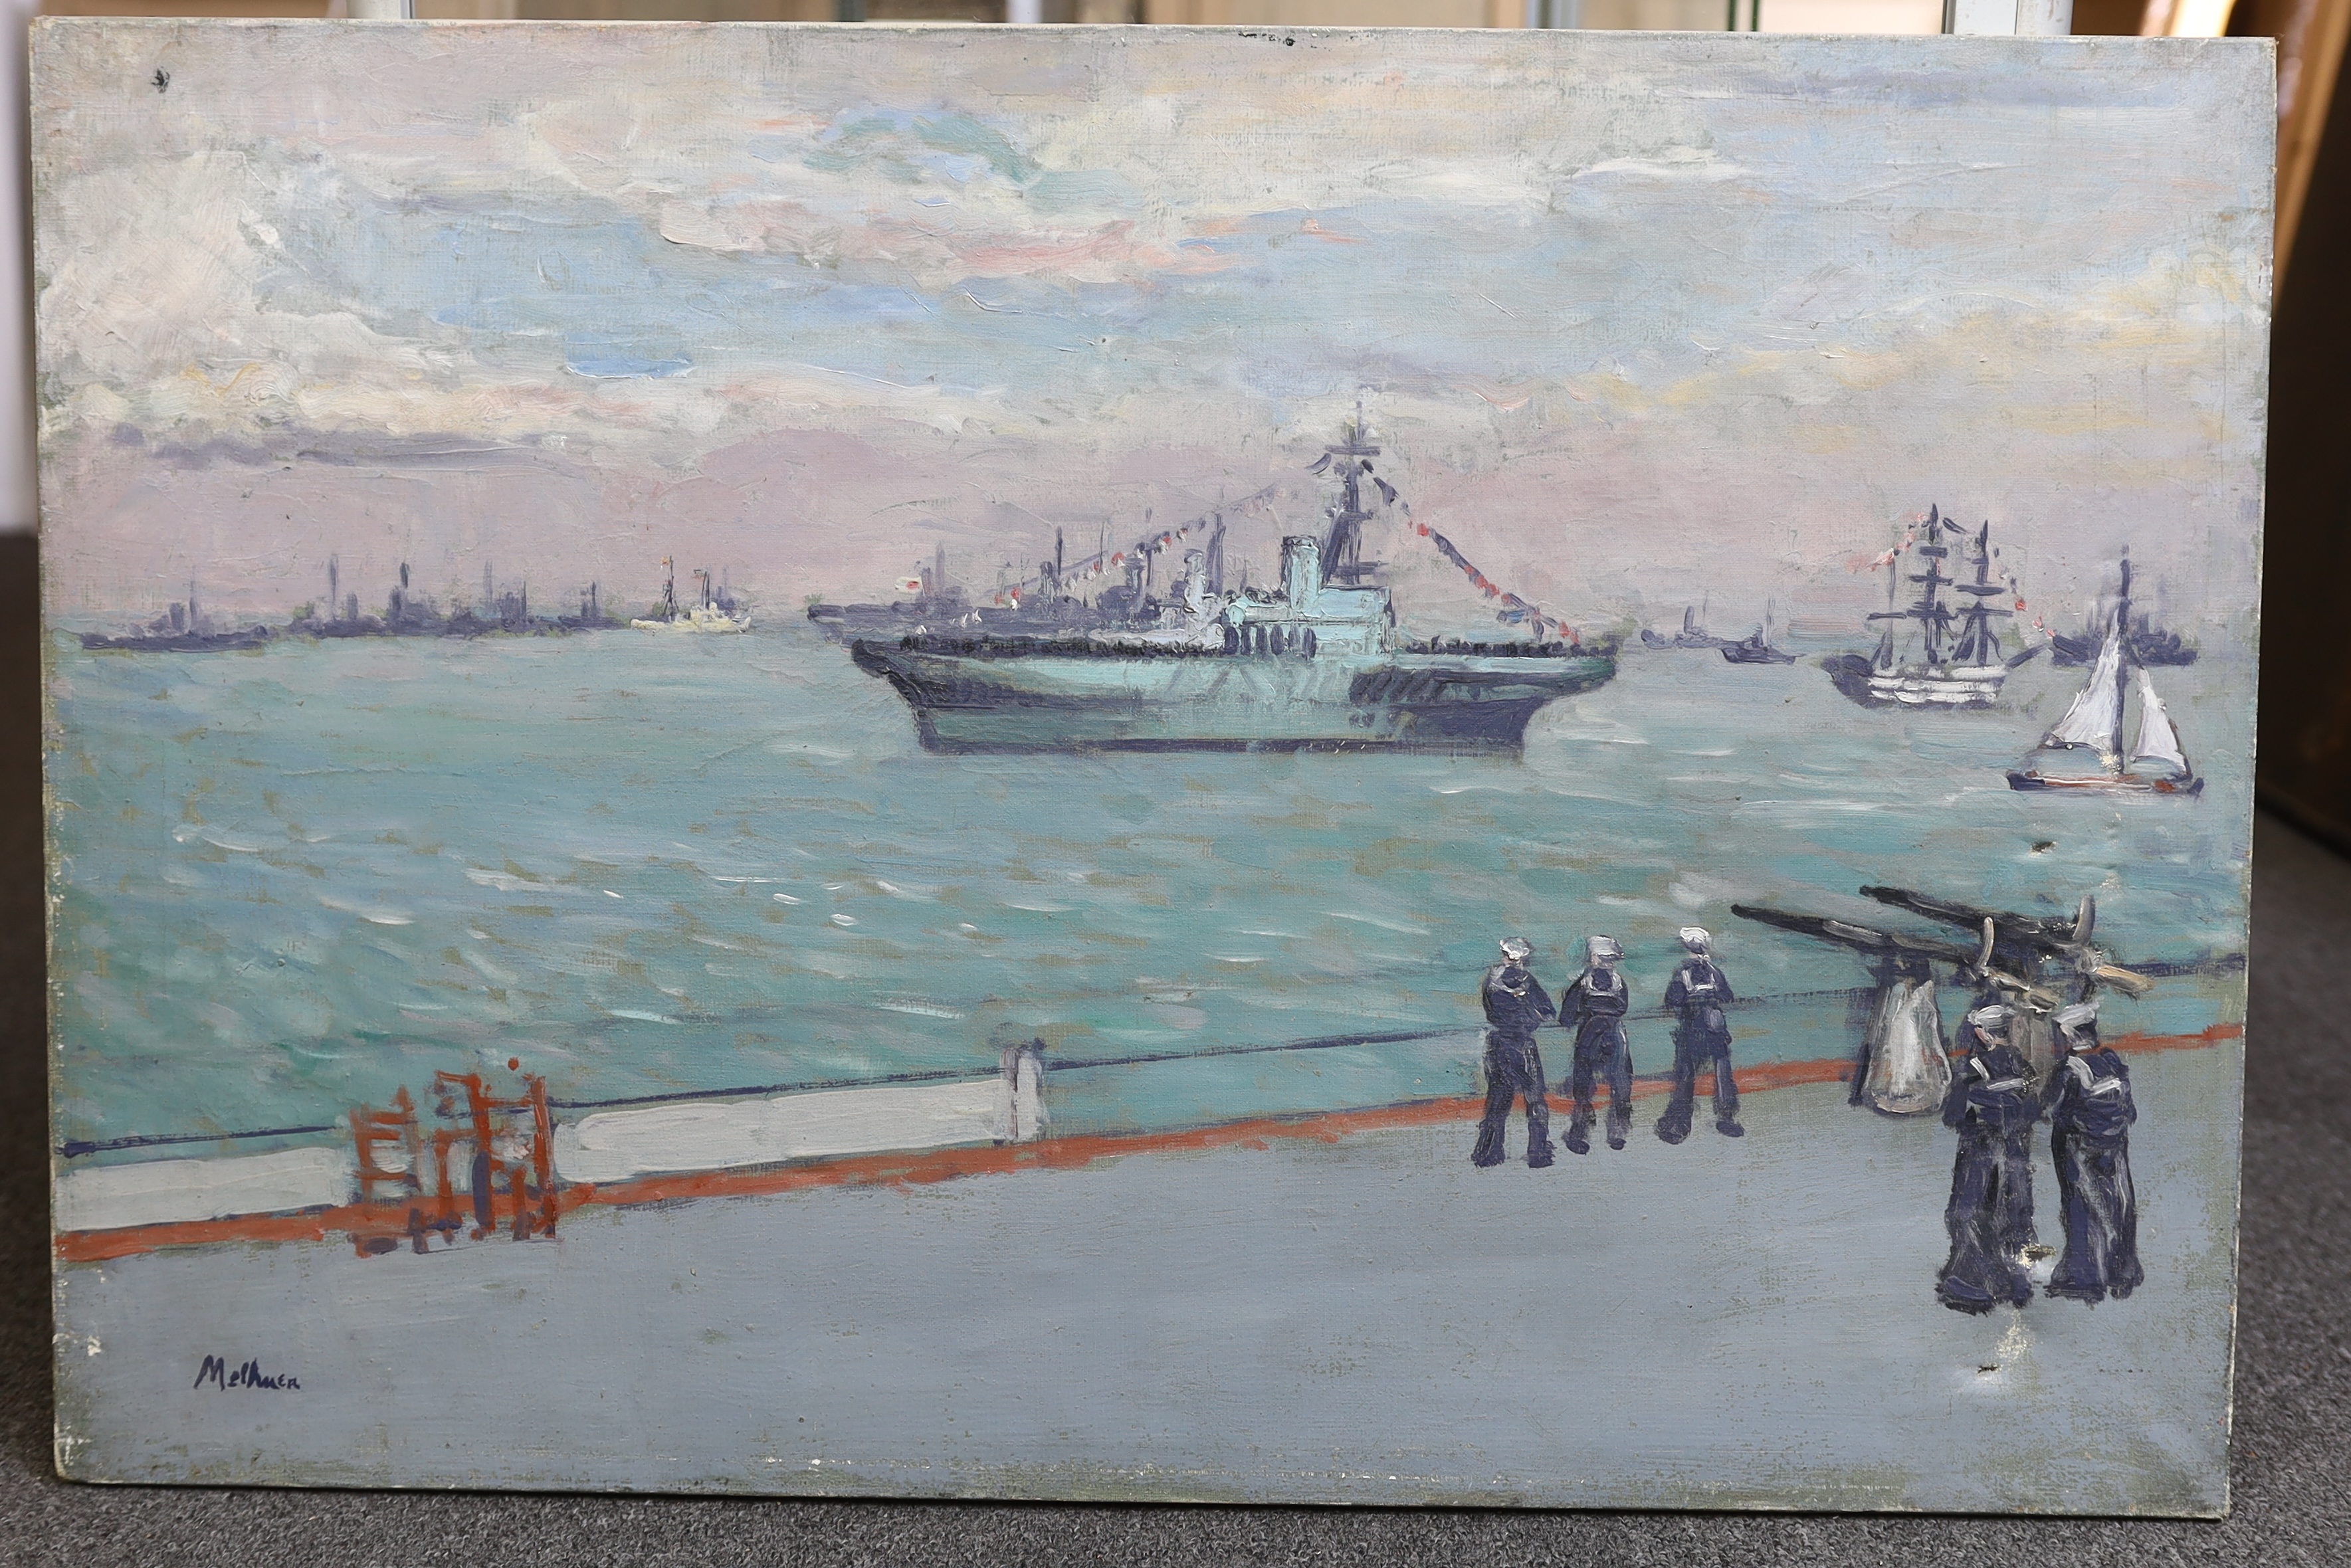 Lord Methuen (English, 1886-1974), Spithead Review 'The Surprise' with HM The Queen on board, coming into view before inspecting line of aircraft carriers', oil on canvas, 51 x 76cm